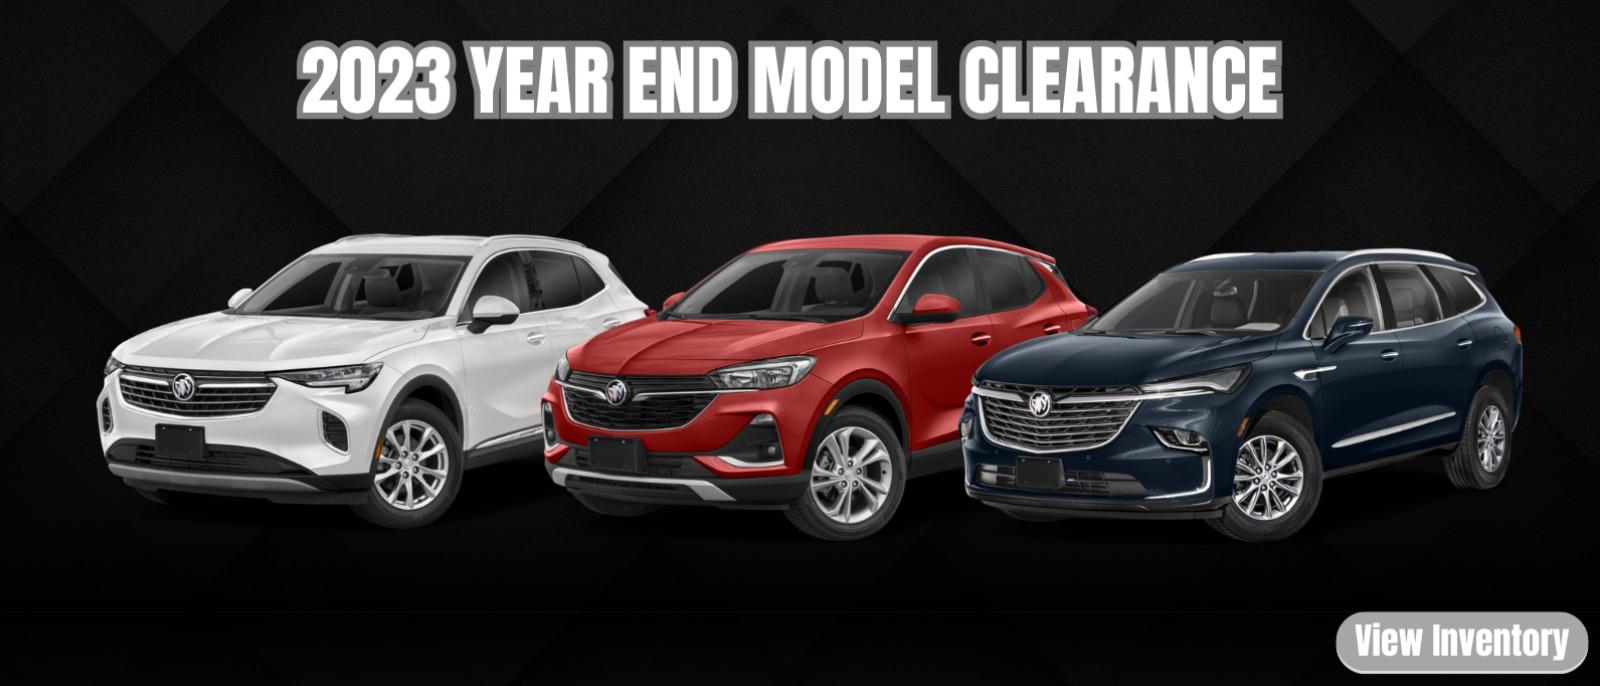 2023 year end model clearance